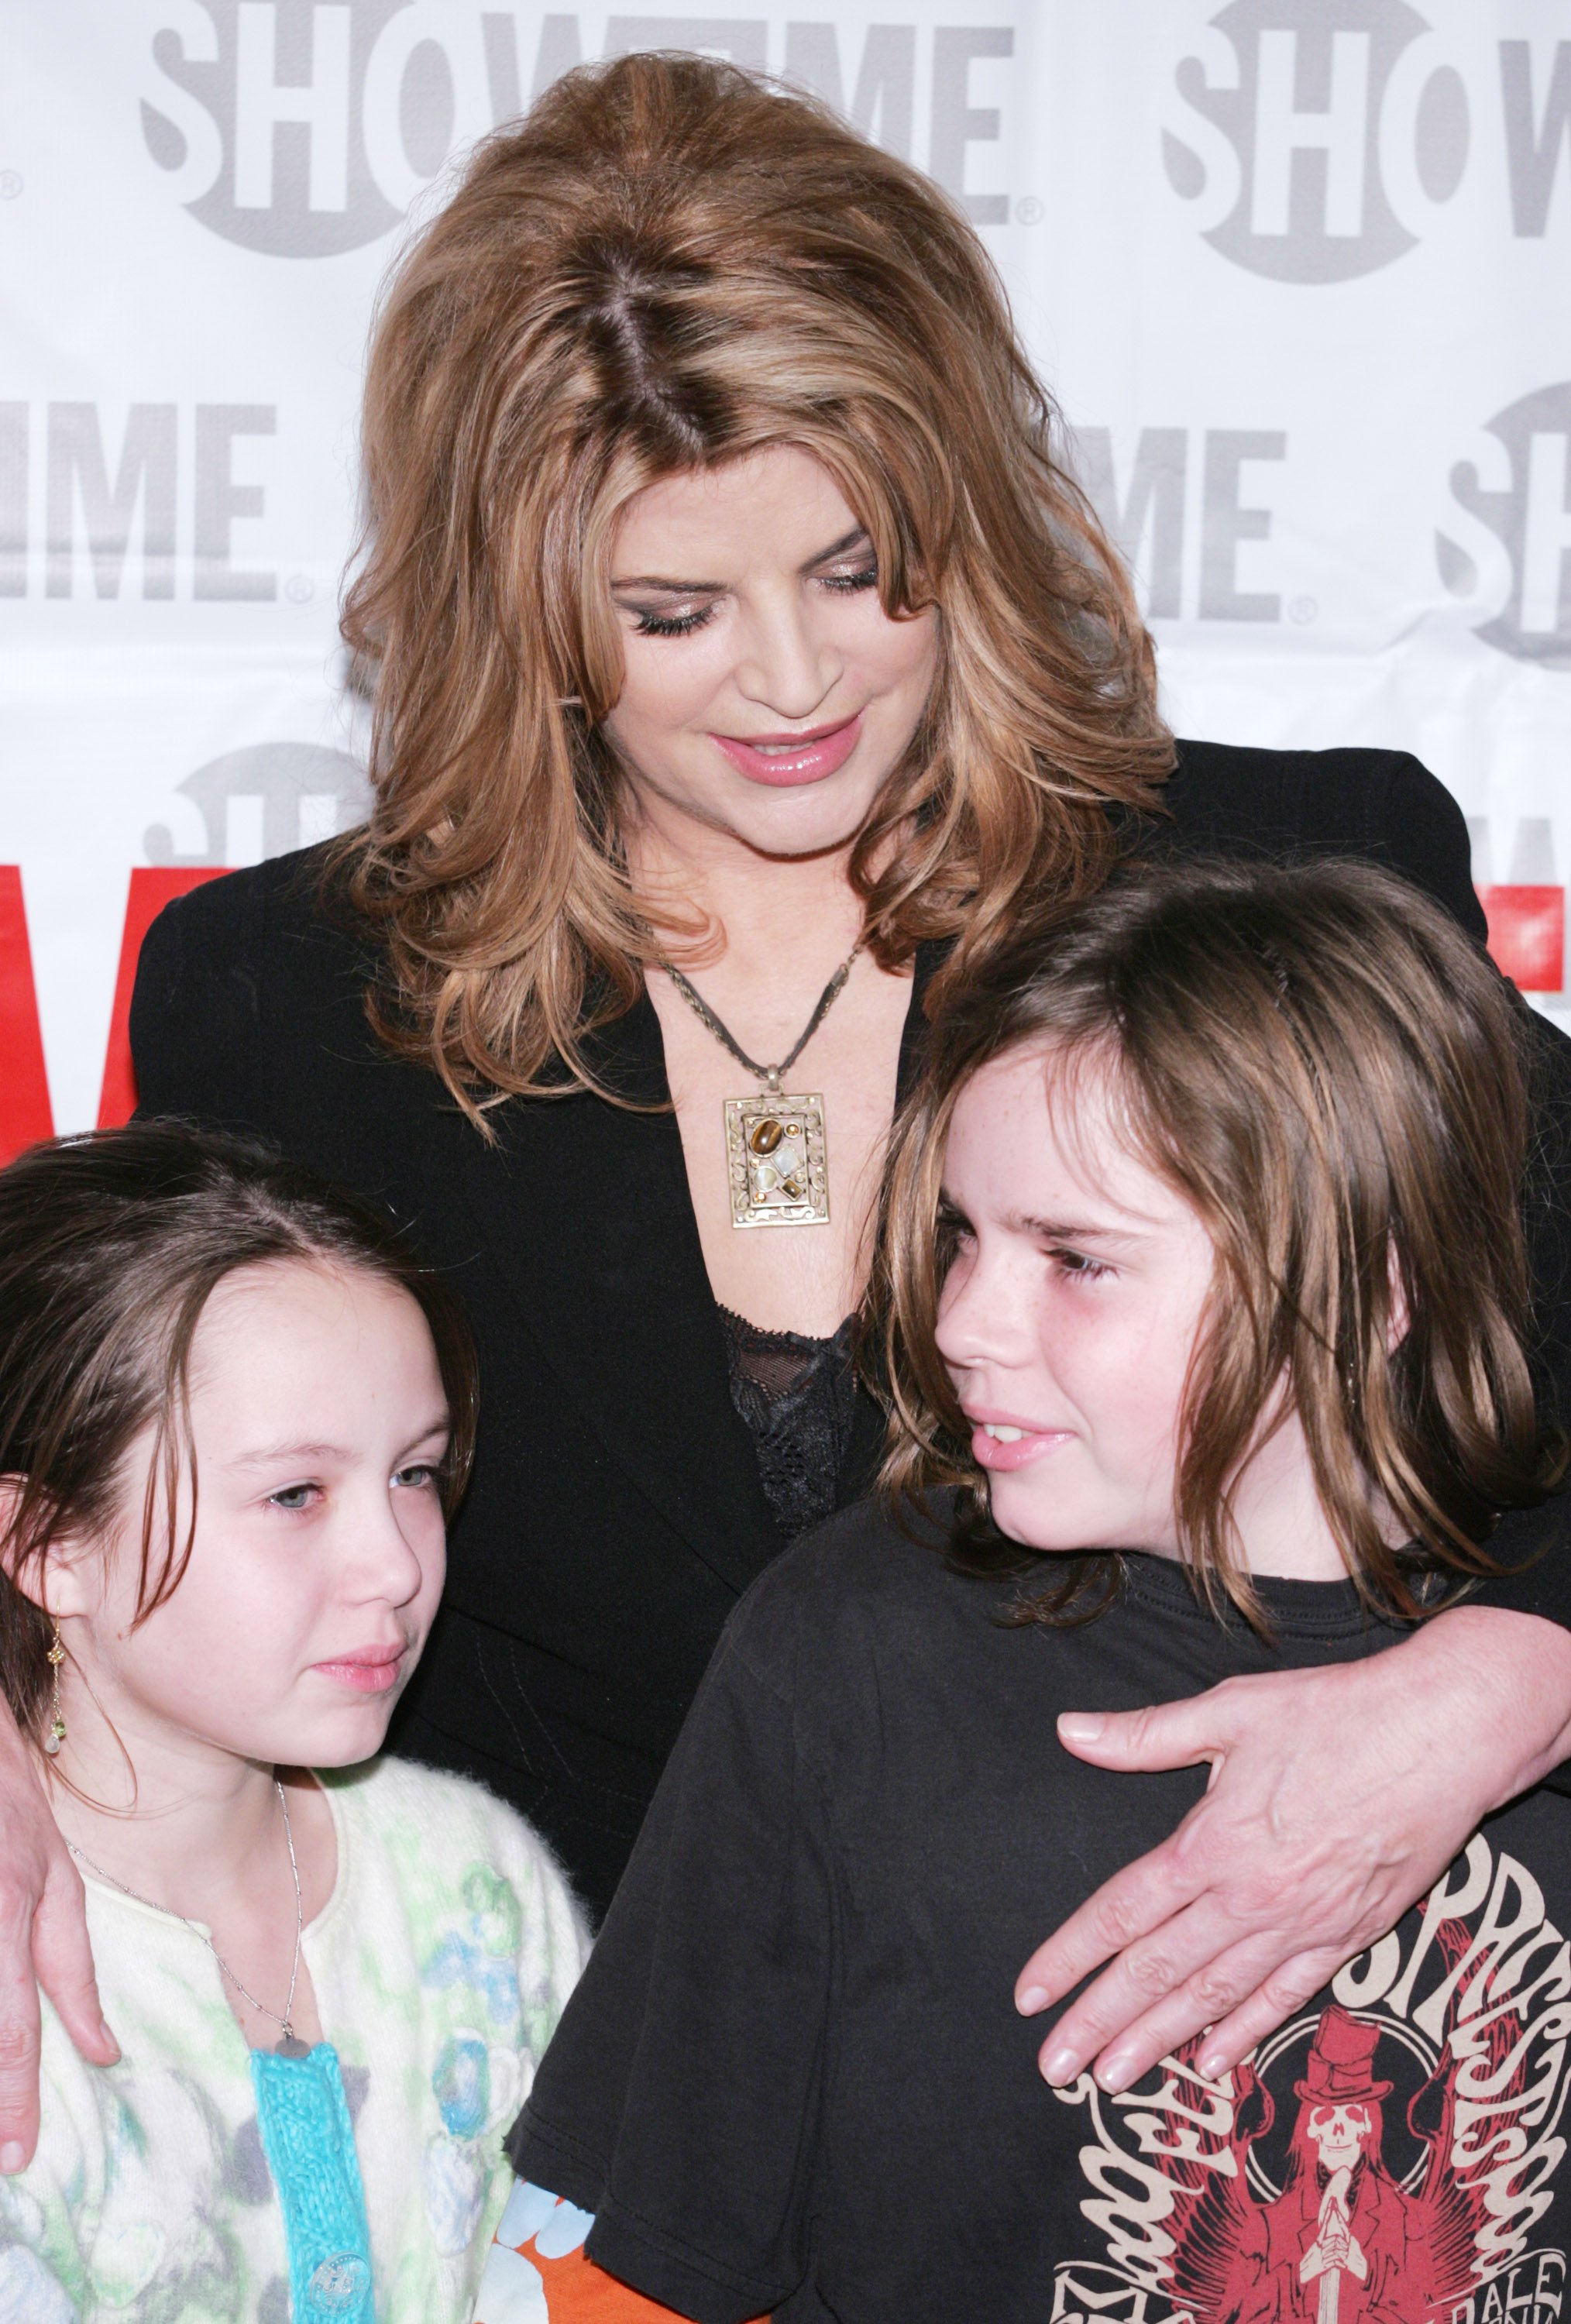 Kirstie Alley with her children Lilie Parker and William Parker at a Showtime TCA Press Tour Party on January 12, 2005 | Source: Getty Images